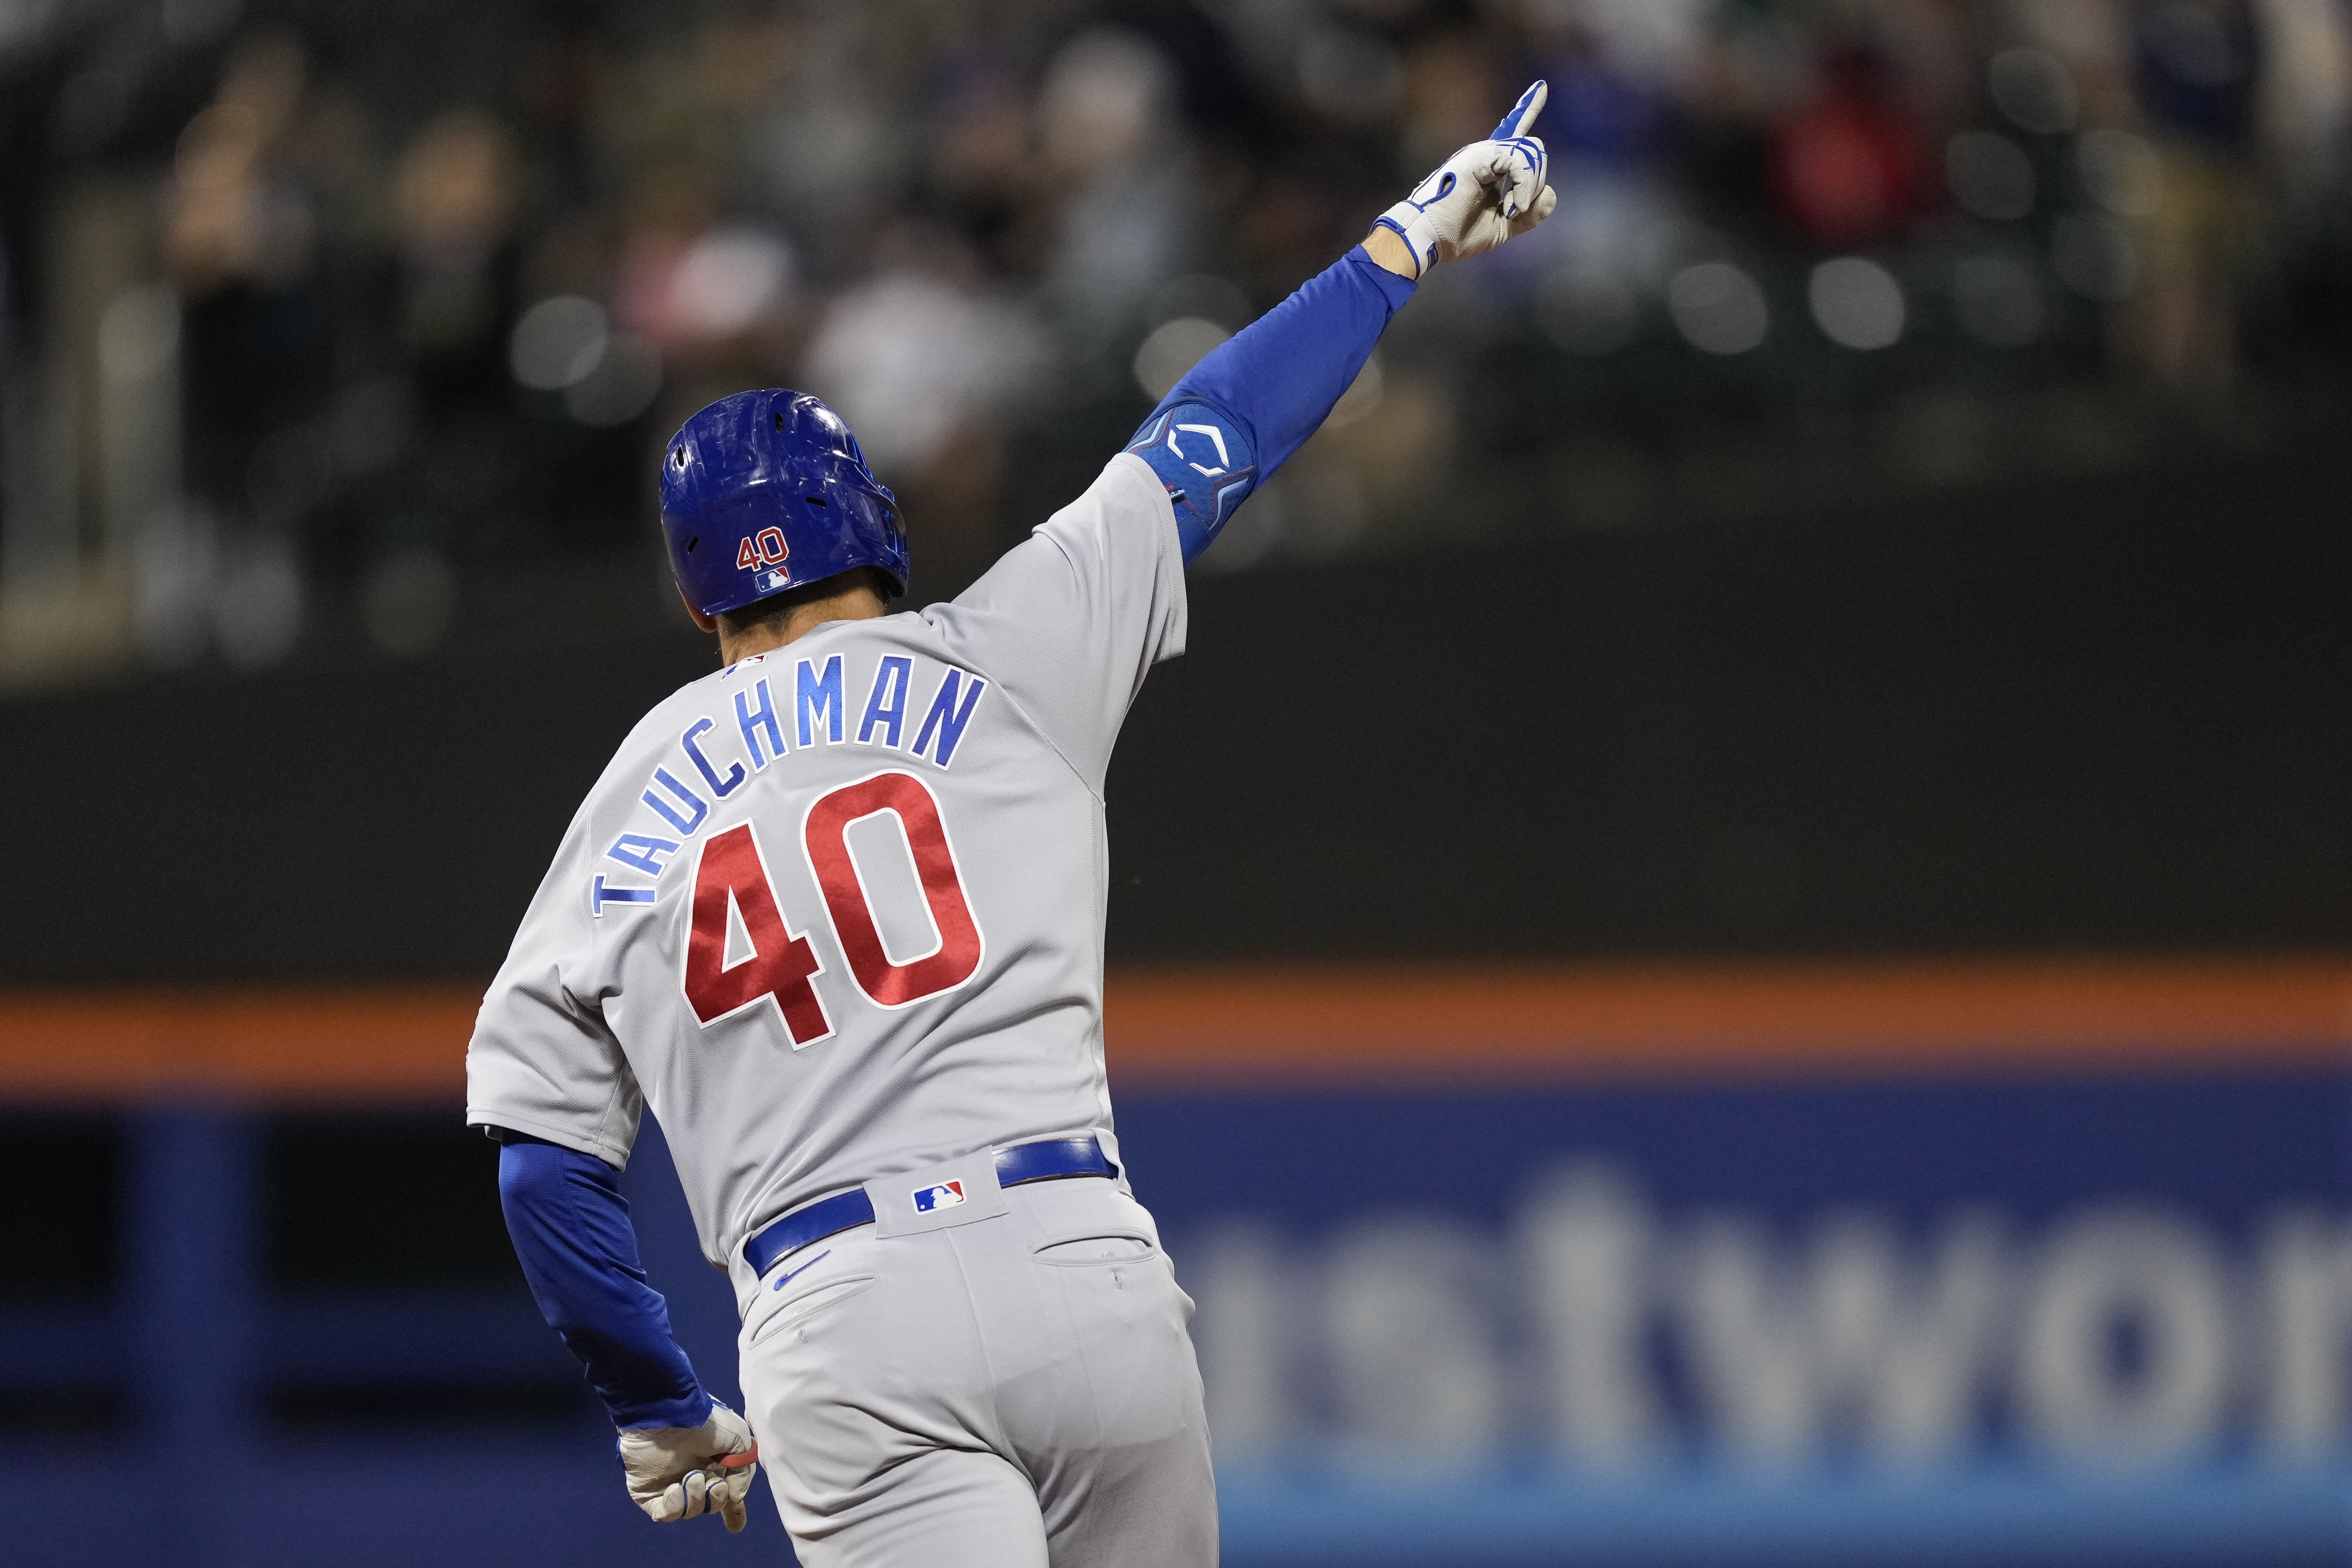 Cubs' new approach leads to Opening Day win